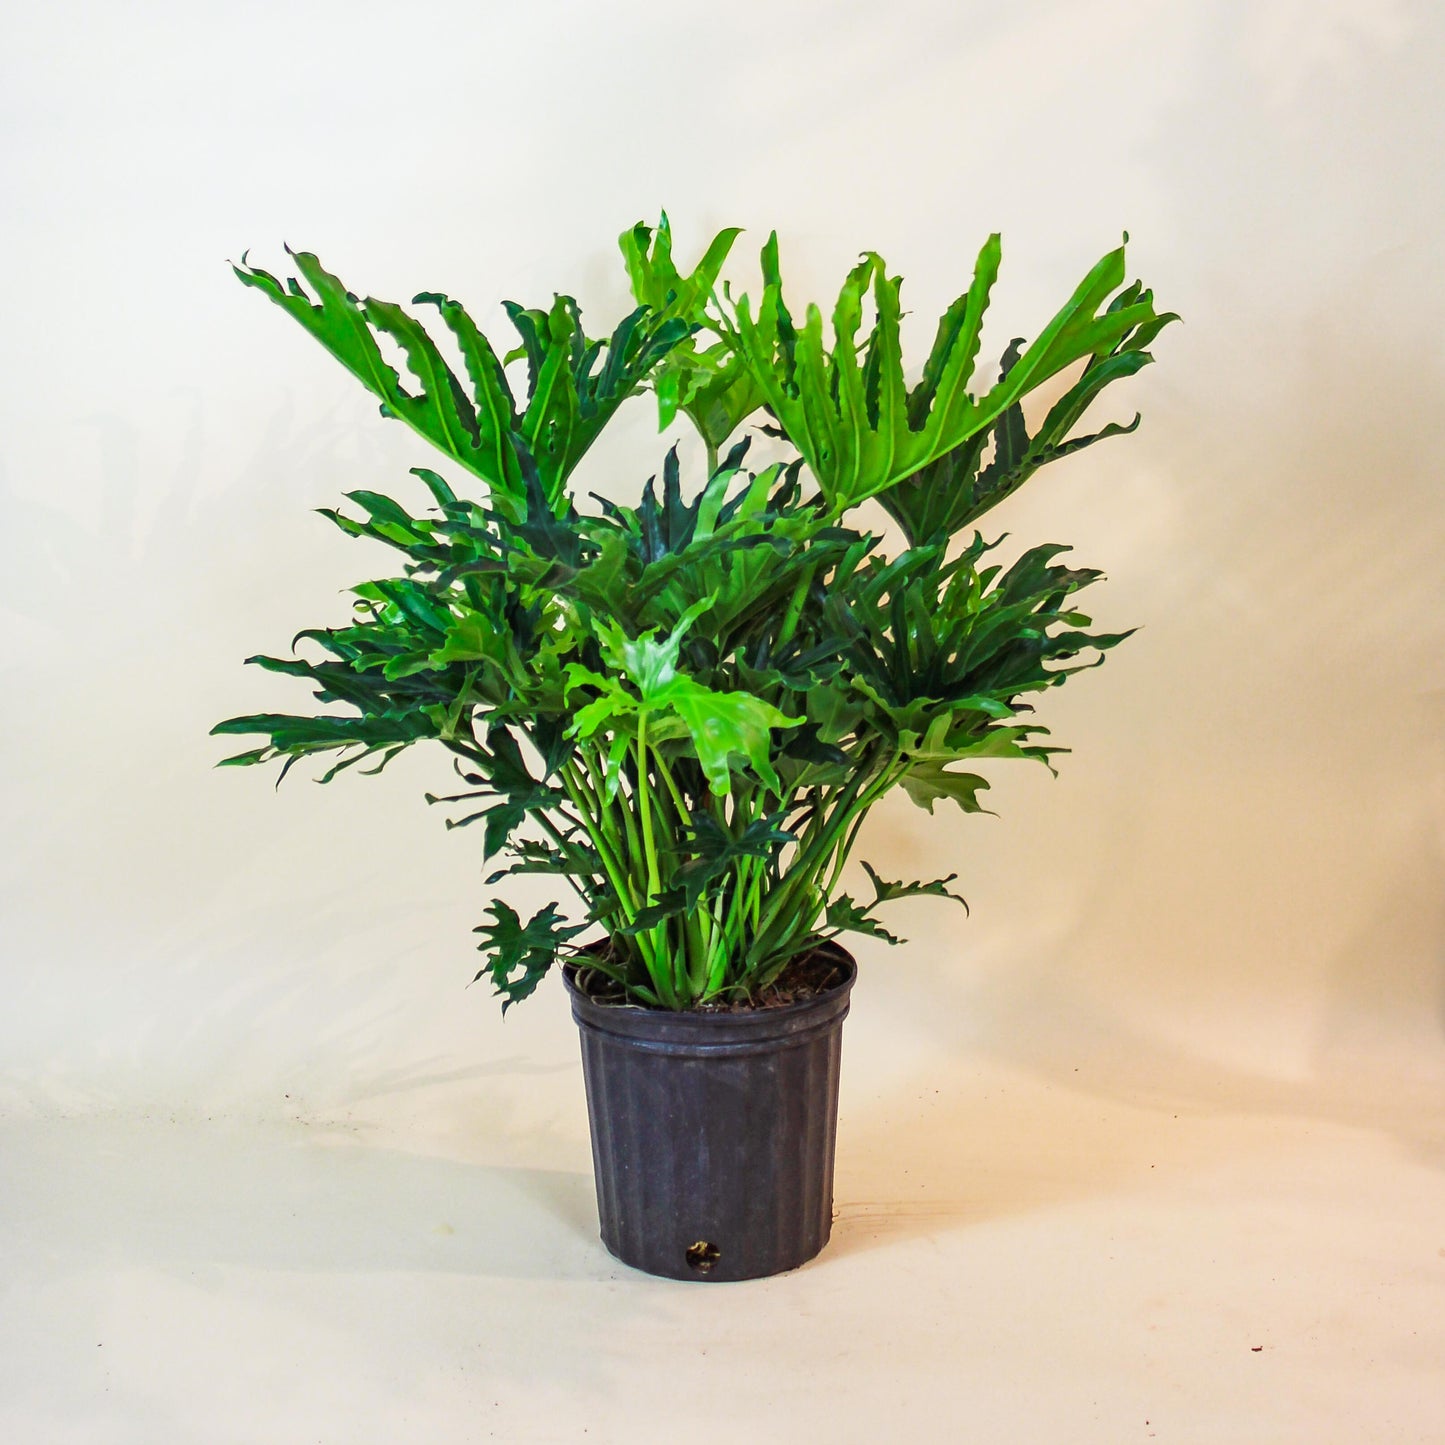 Selloum (Philodendron) in a 8 inch pot. Indoor plant for sale by Promise Supply for delivery and pickup in Toronto